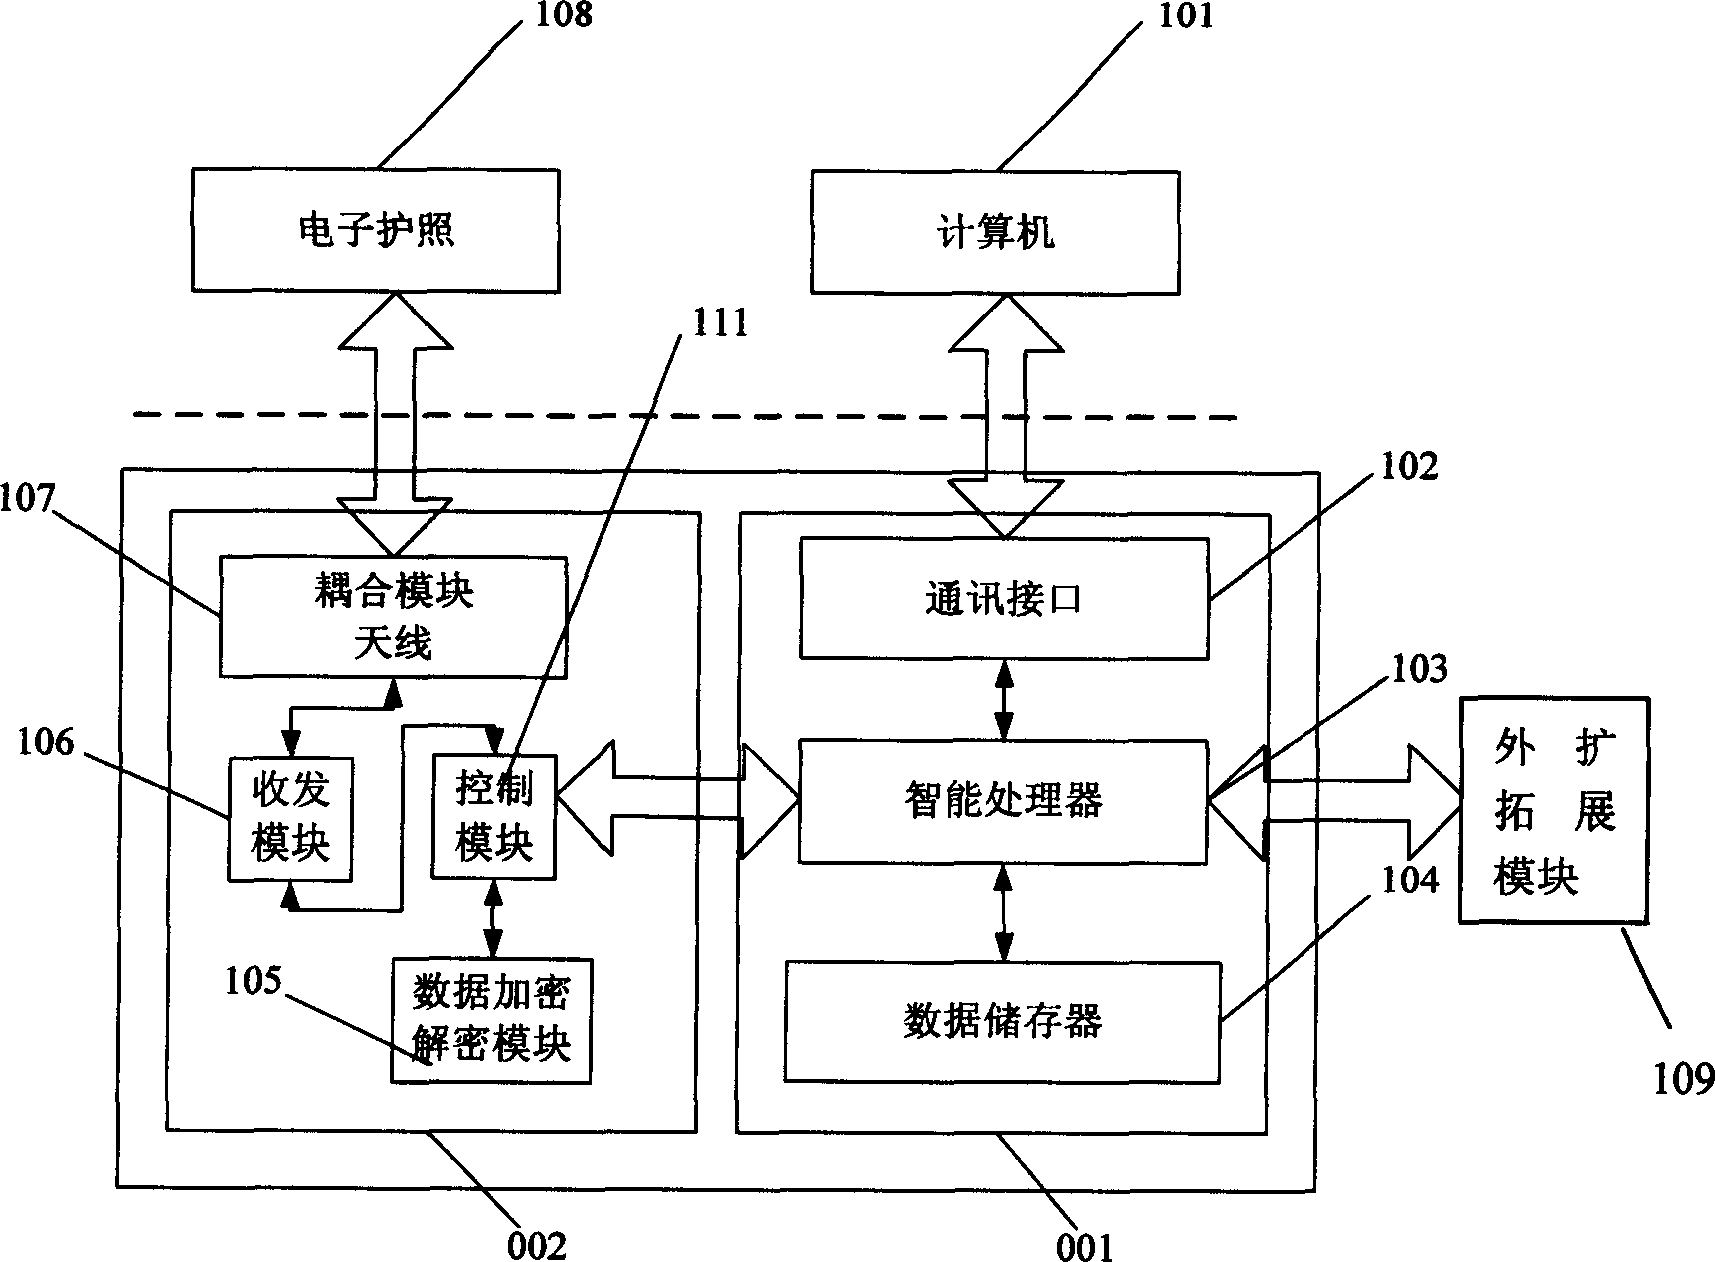 Electronic credential reading device